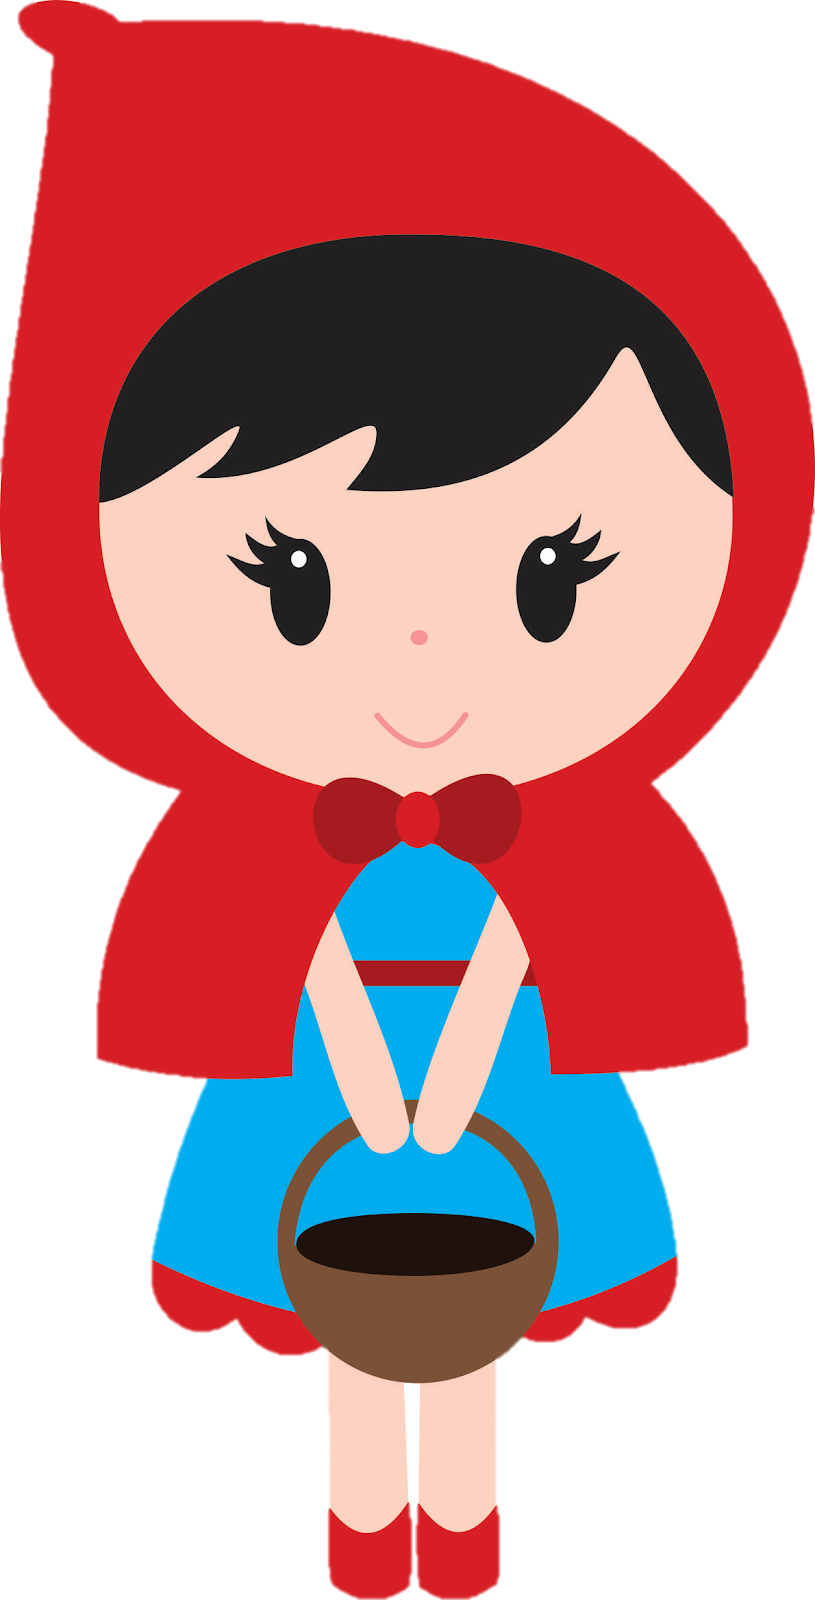 Little free creationz. House clipart red riding hood